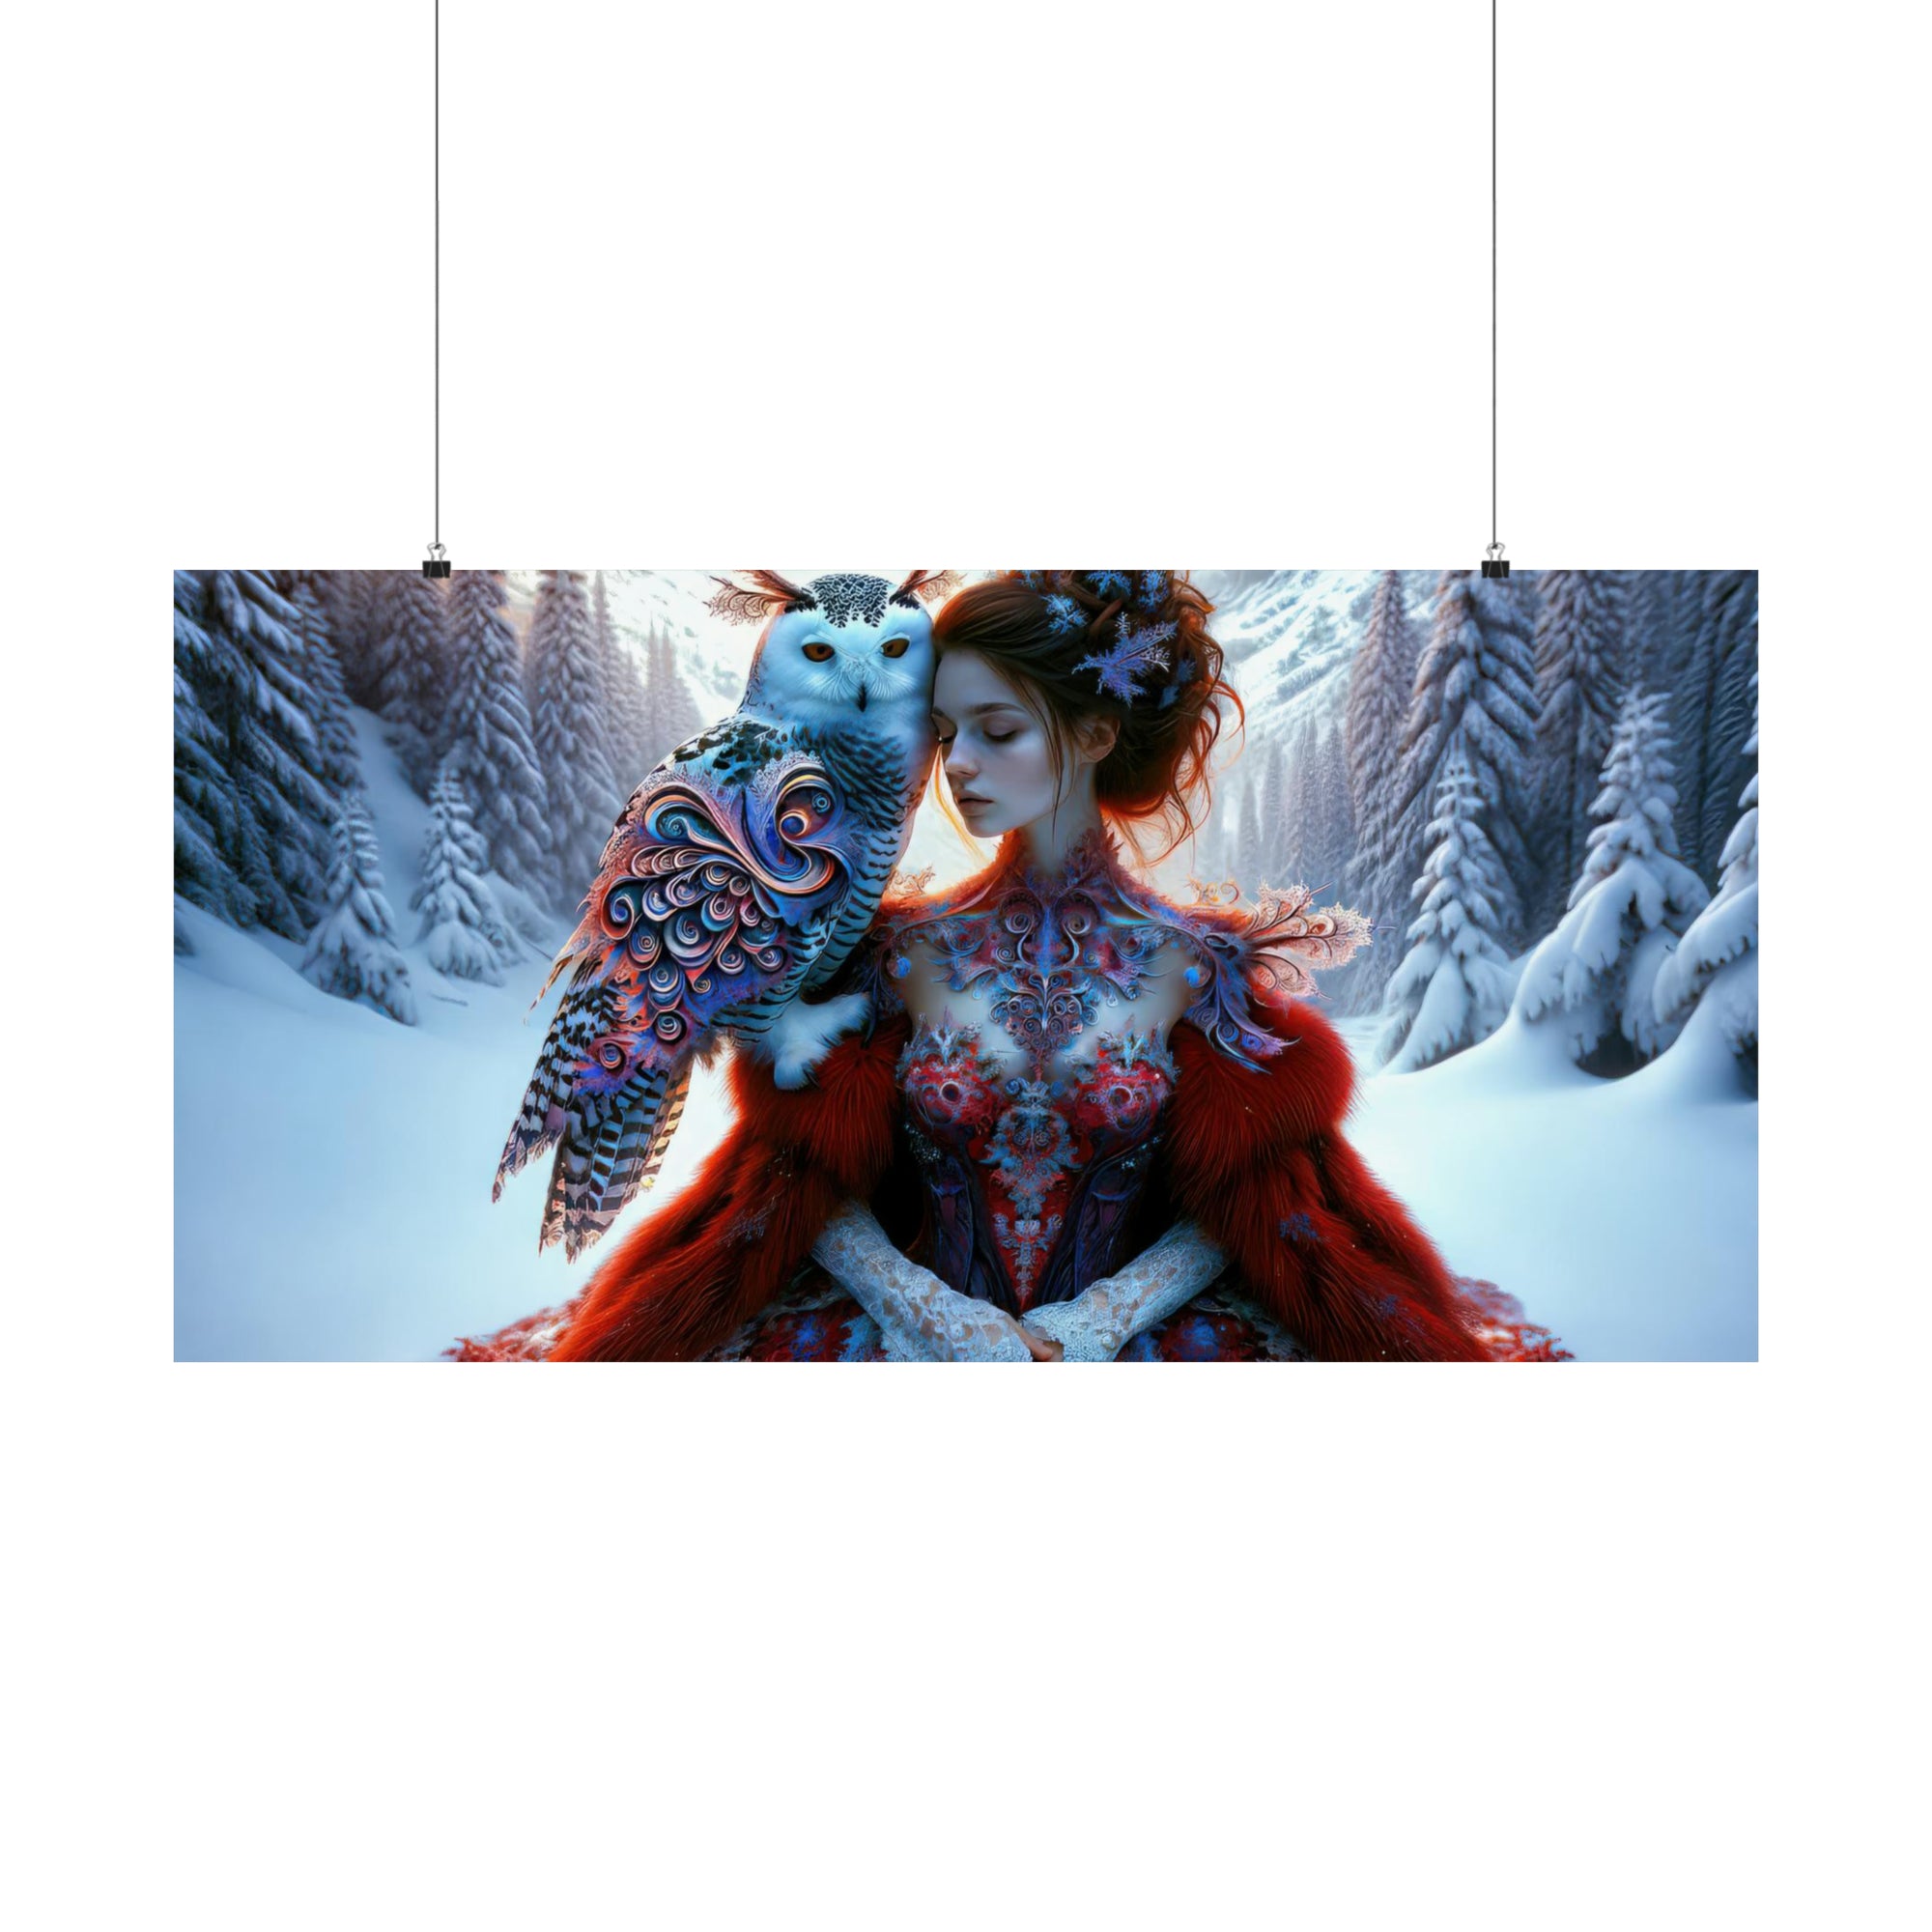 Whispering Wings in the Winter Wilds Poster